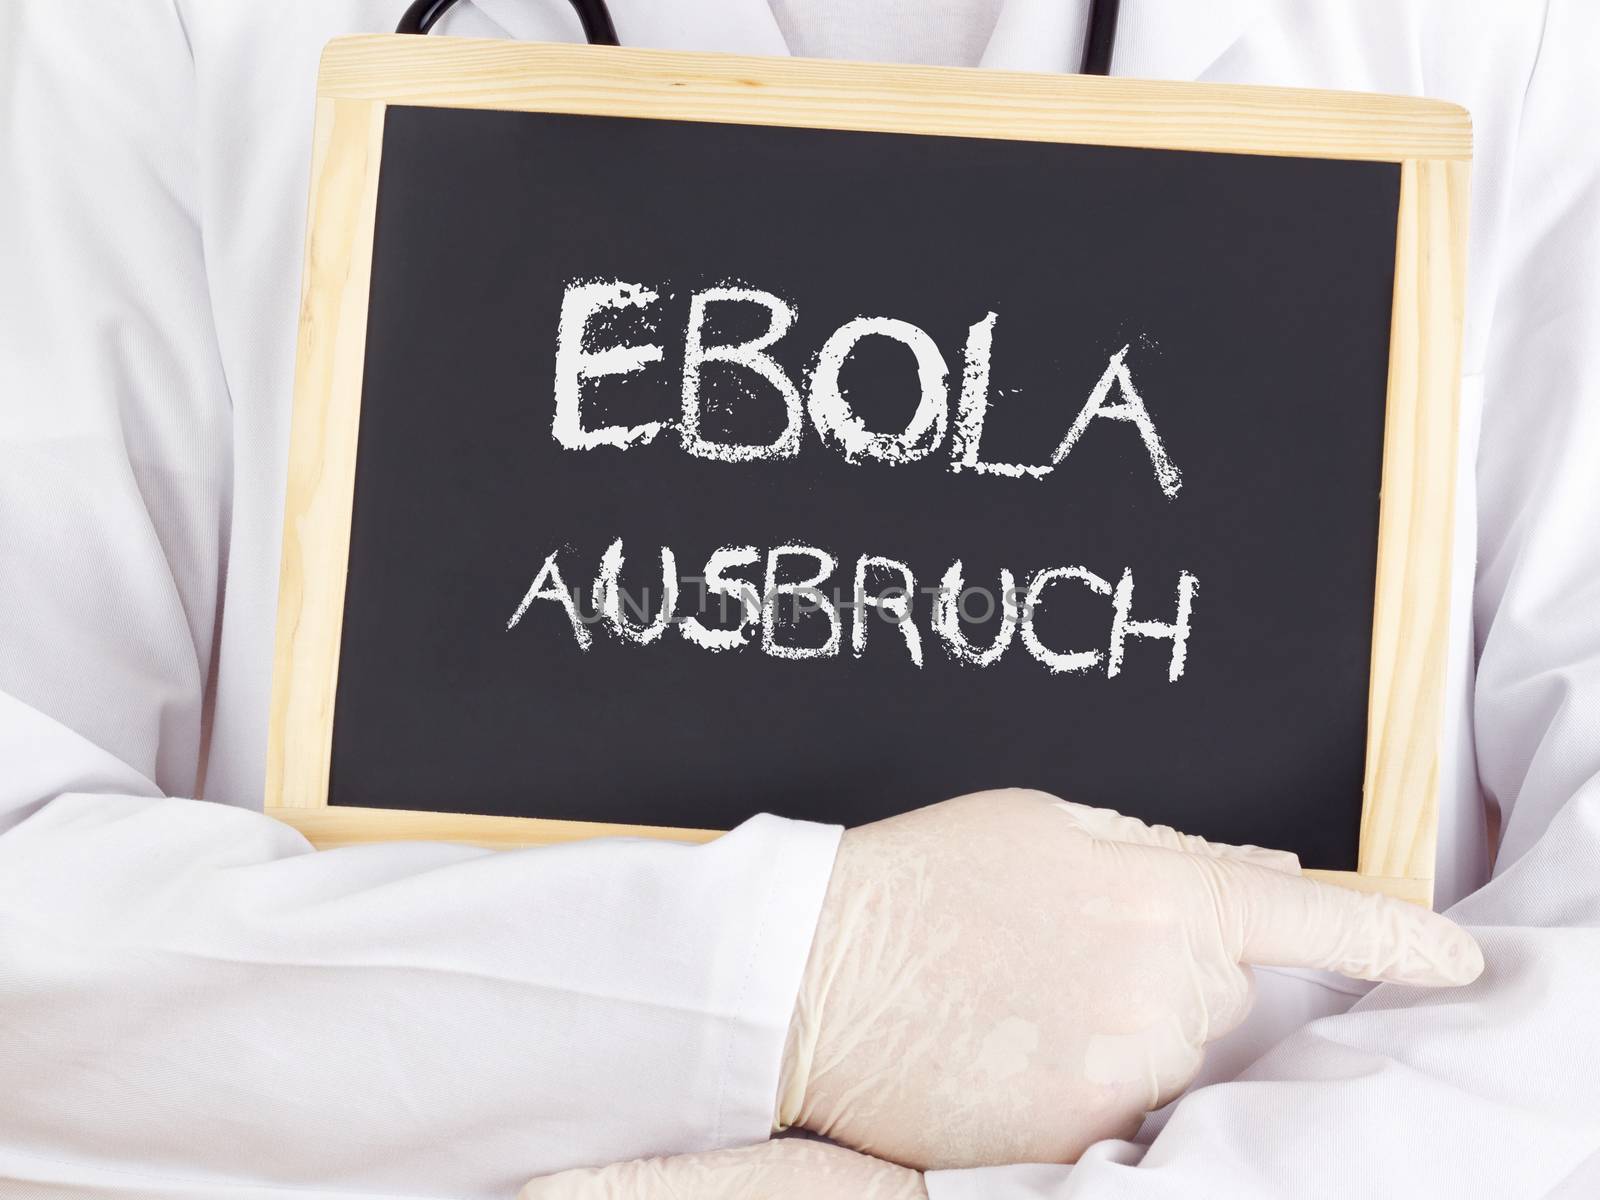 Doctor shows information: Ebola outbreak in german by gwolters